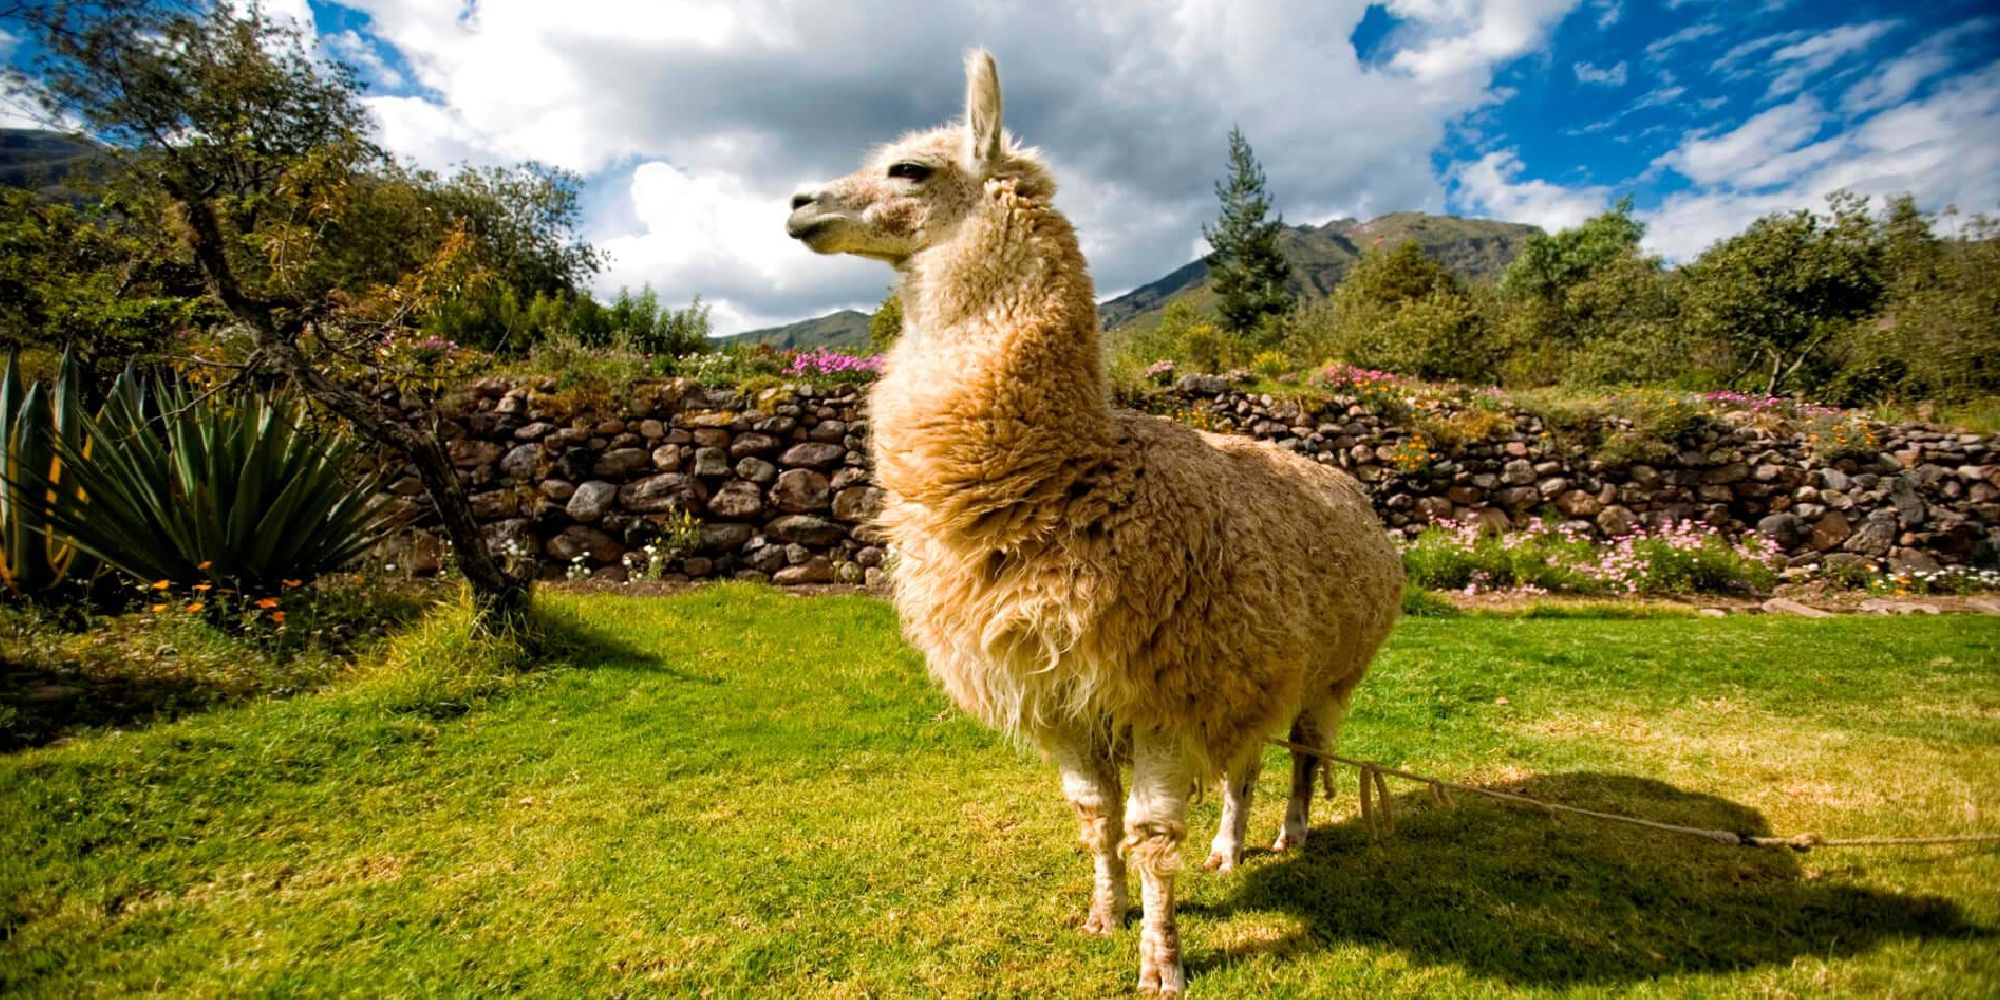 A wide angle shot of a domesticated llama standing in a yard